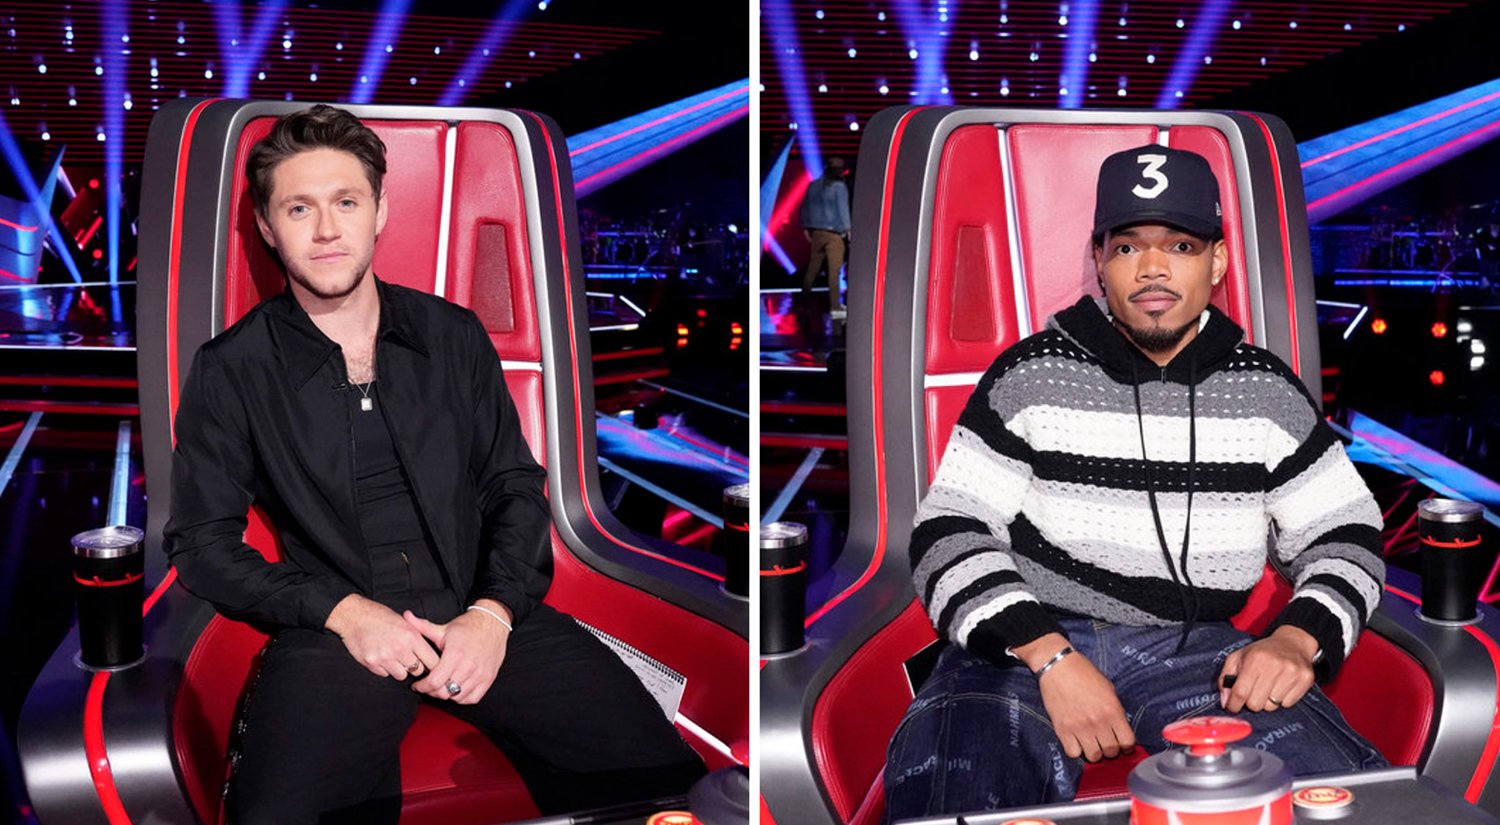 Left: Niall Horan in his chair on The Voice Season 23, Right: Chance the Rapper in his chair on The Voice Season 23